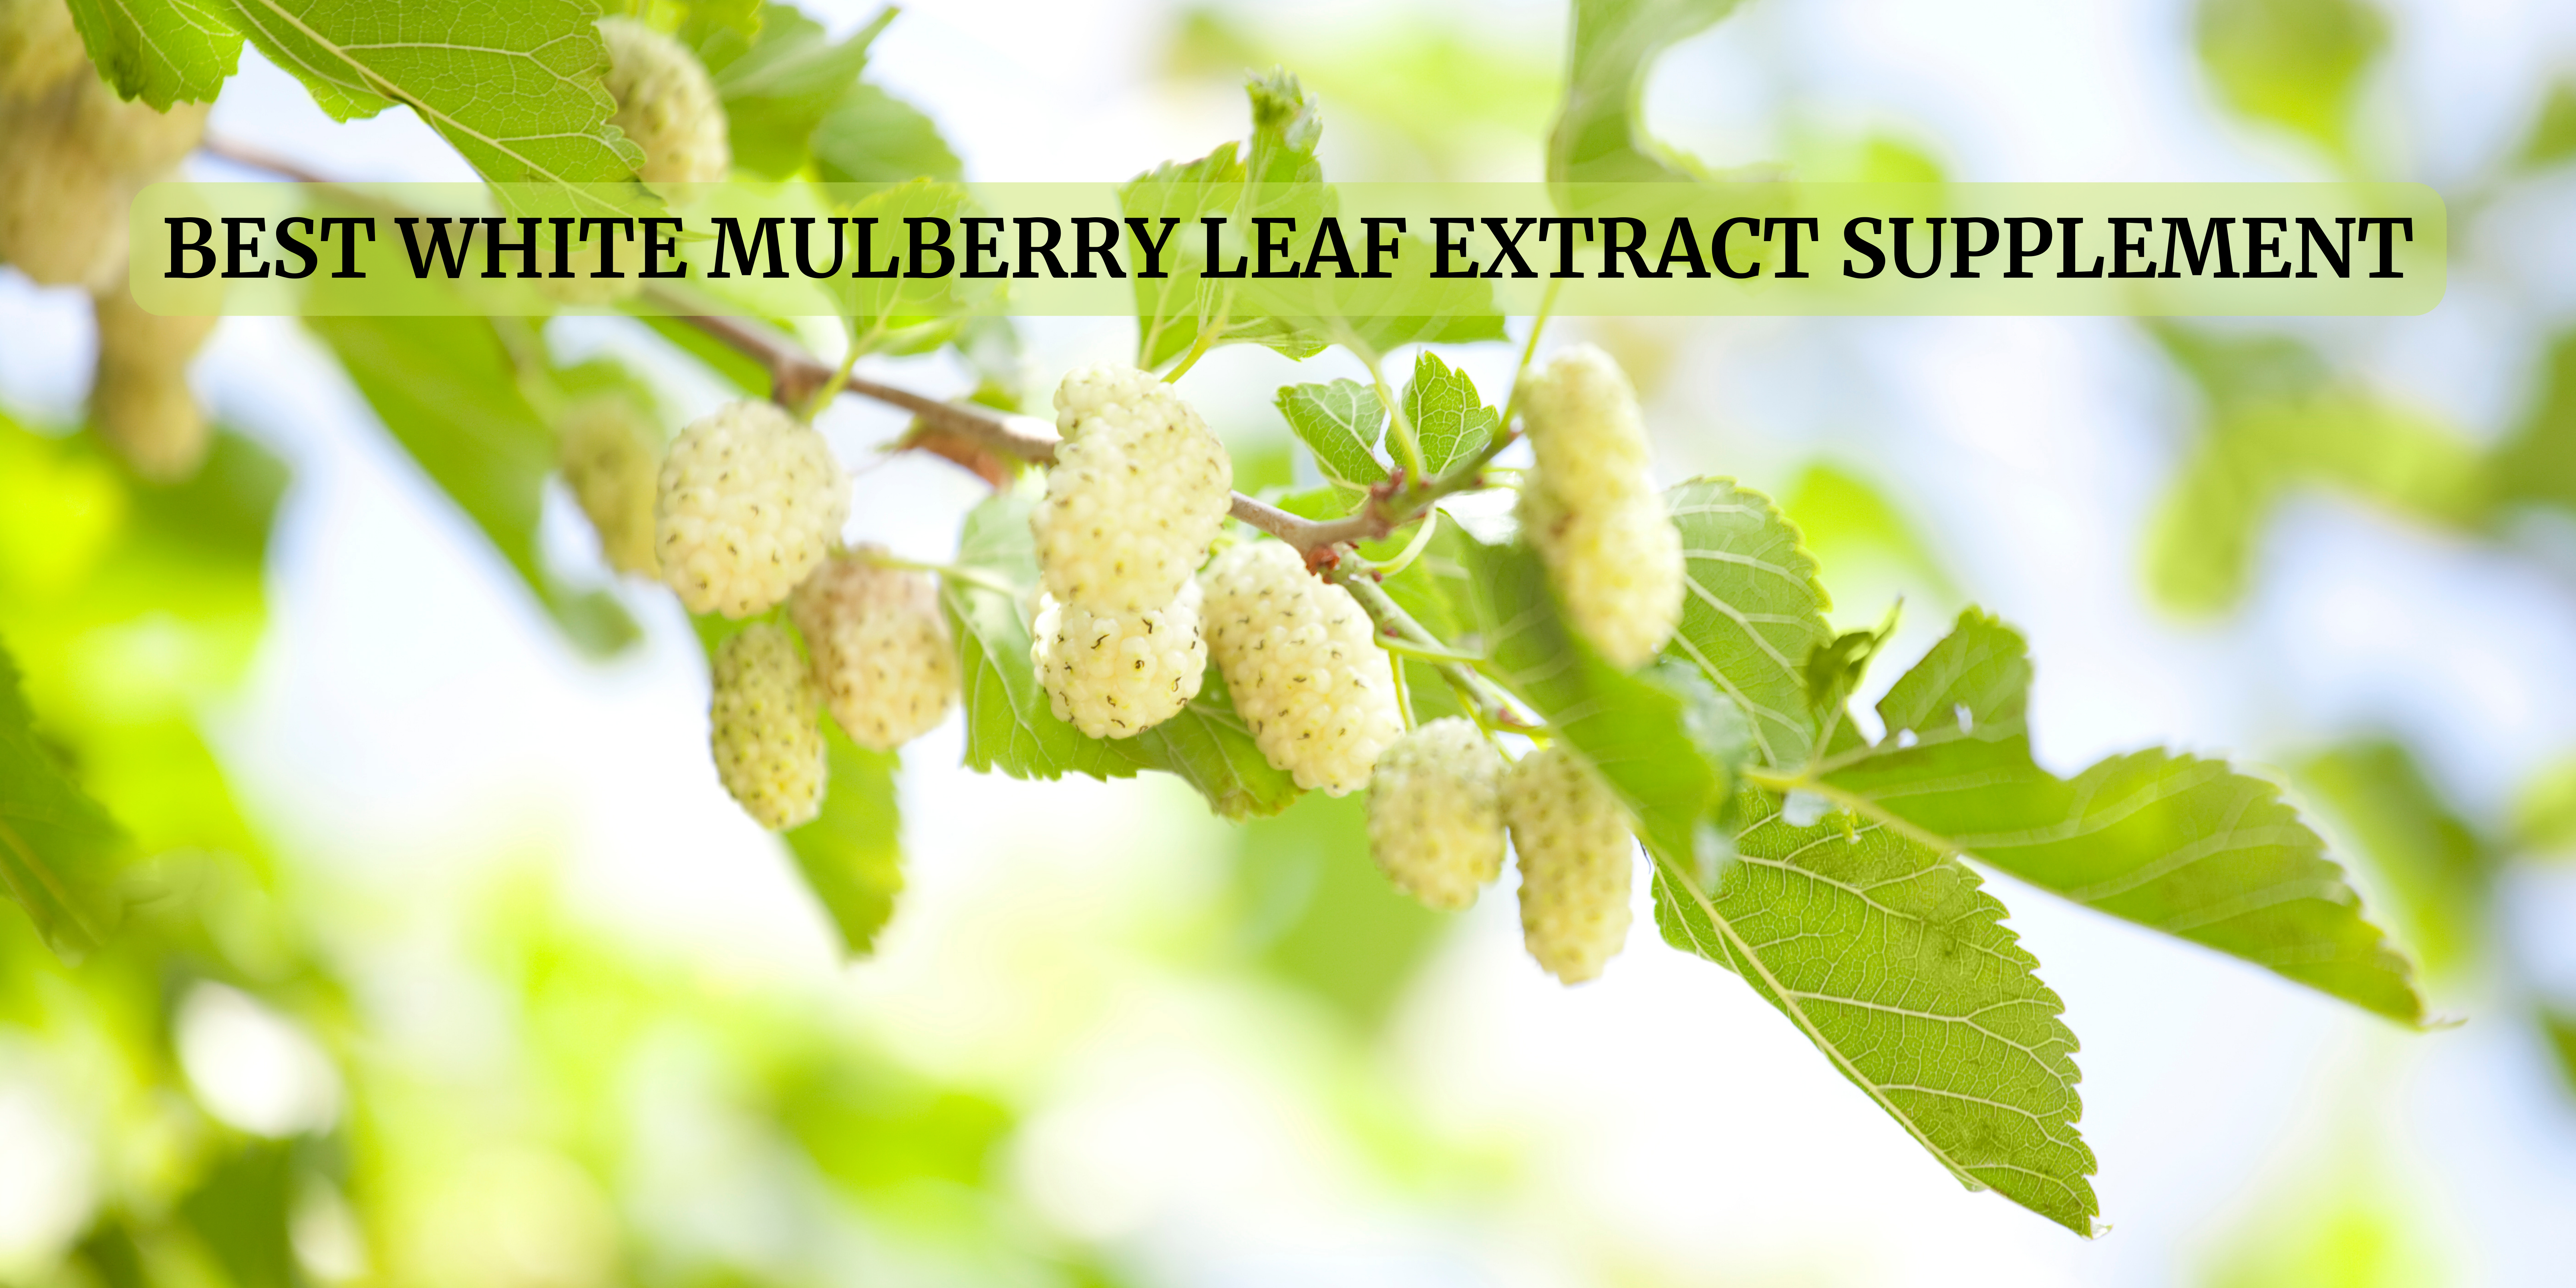 white mulberry leaf extract supplement in Italy